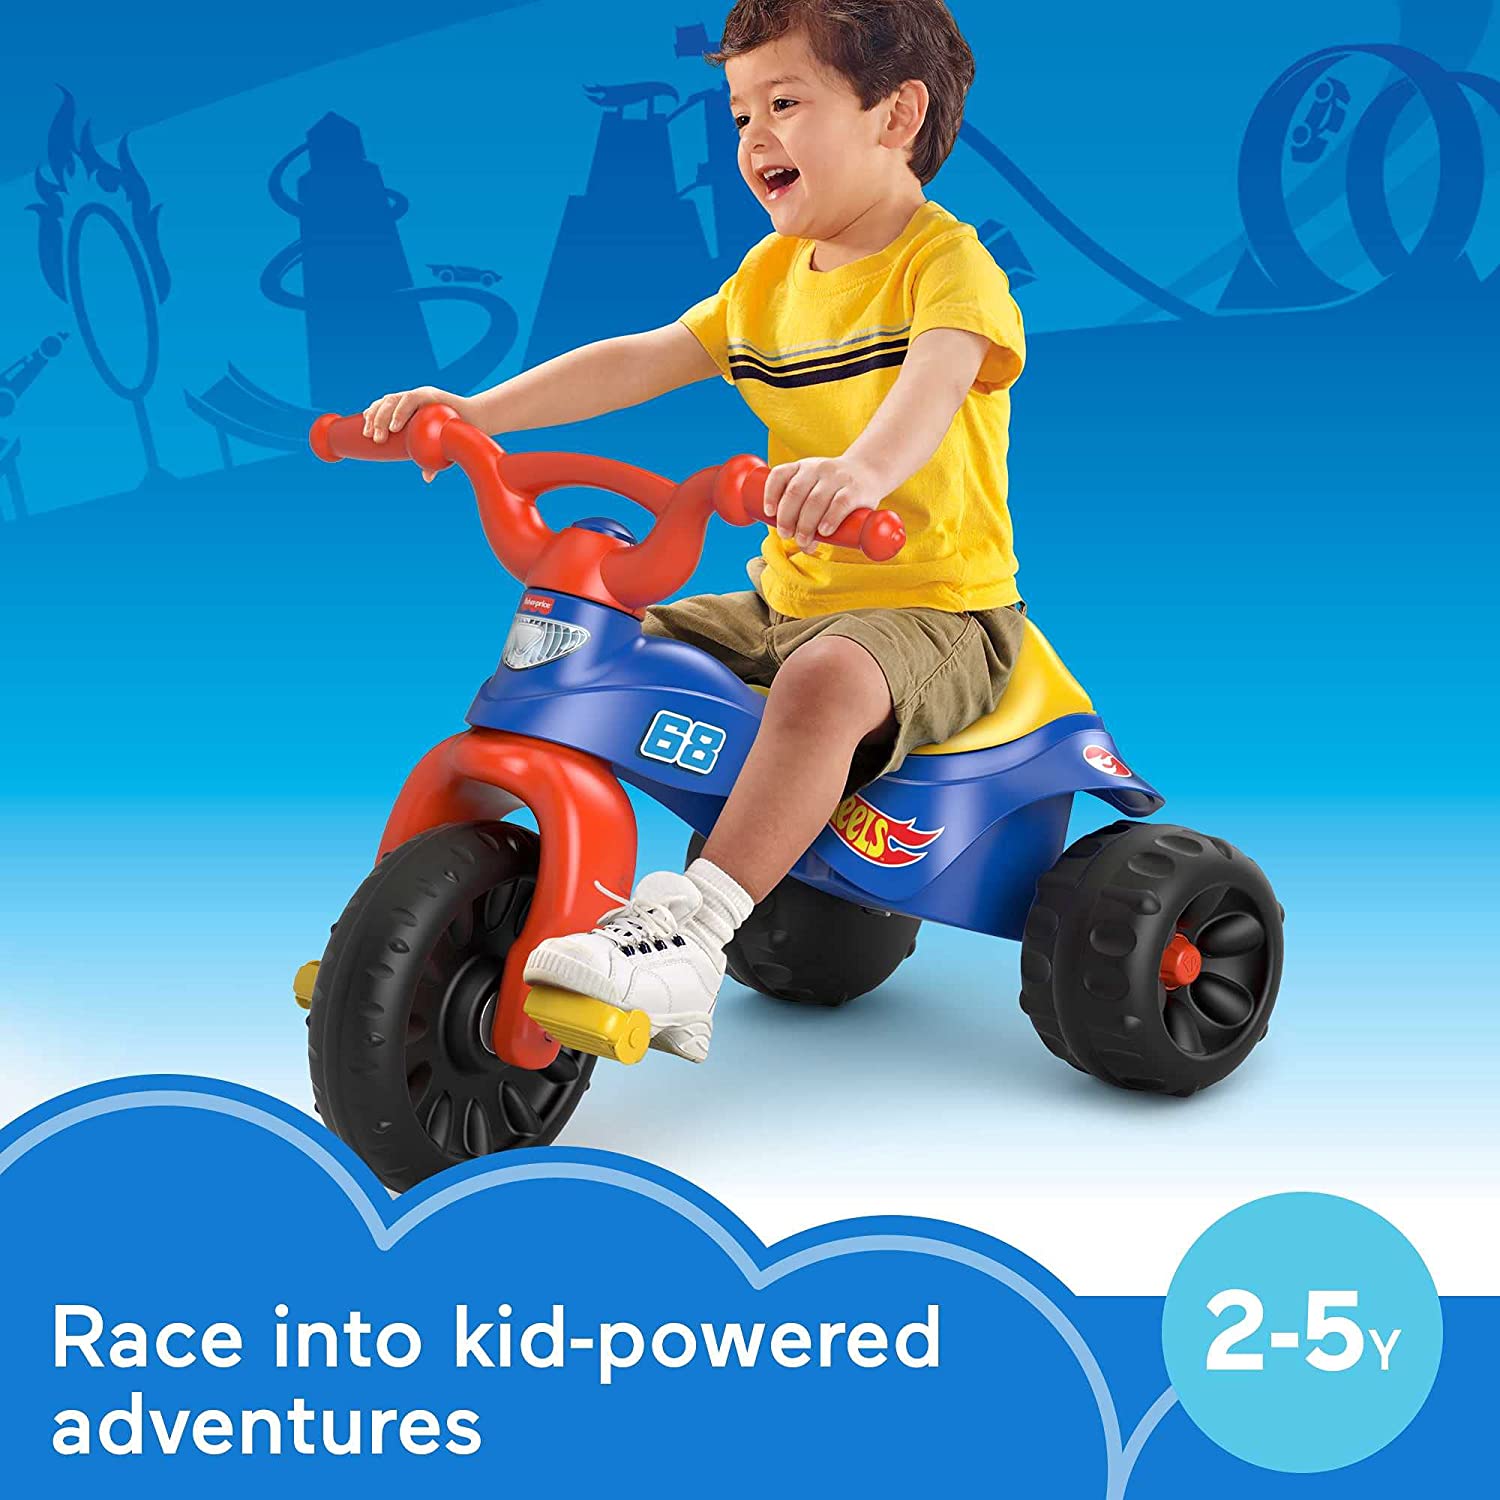 Fisher-Price Hot Wheels Tough Trike - with Awesome Hot Wheels Colors and Graphics